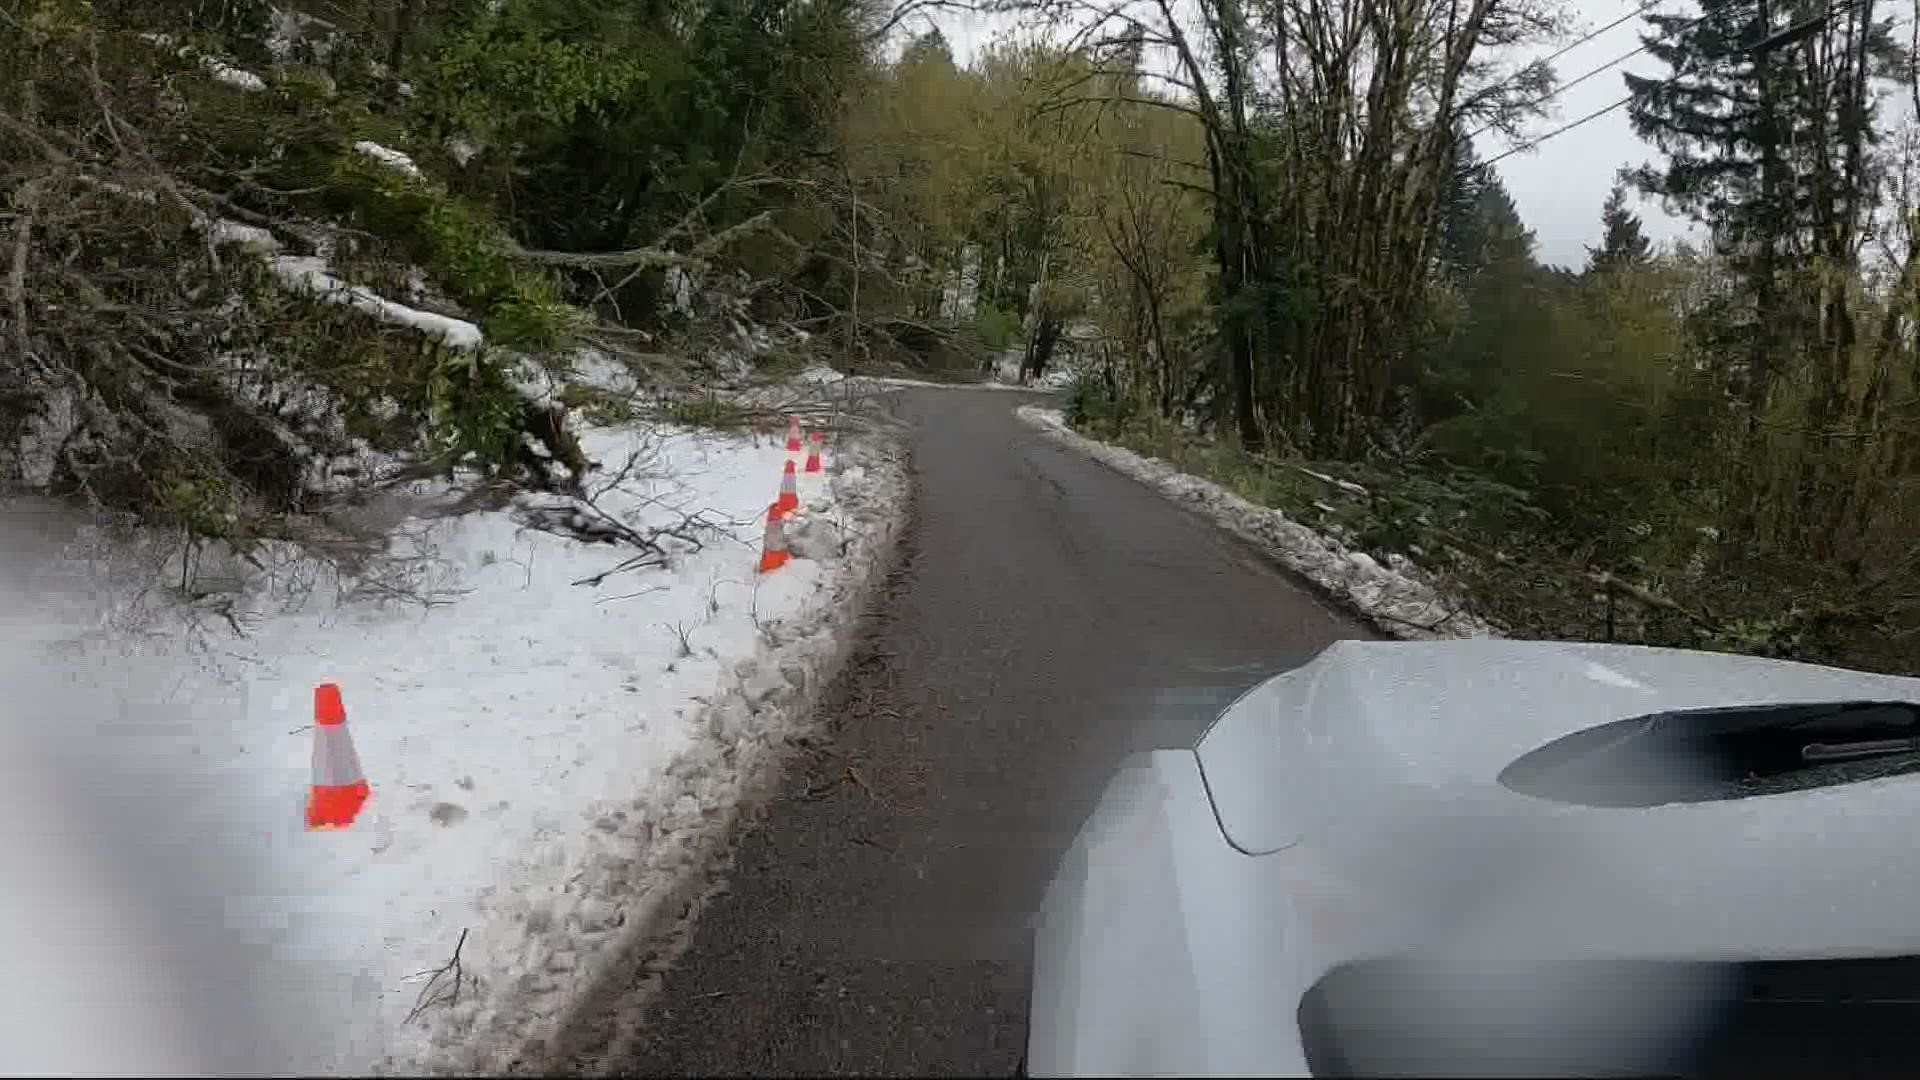 Portland's West Hills area was the hardest-hit by Monday's winter weather because of all the trees, according to the Portland Bureau of Transportation.